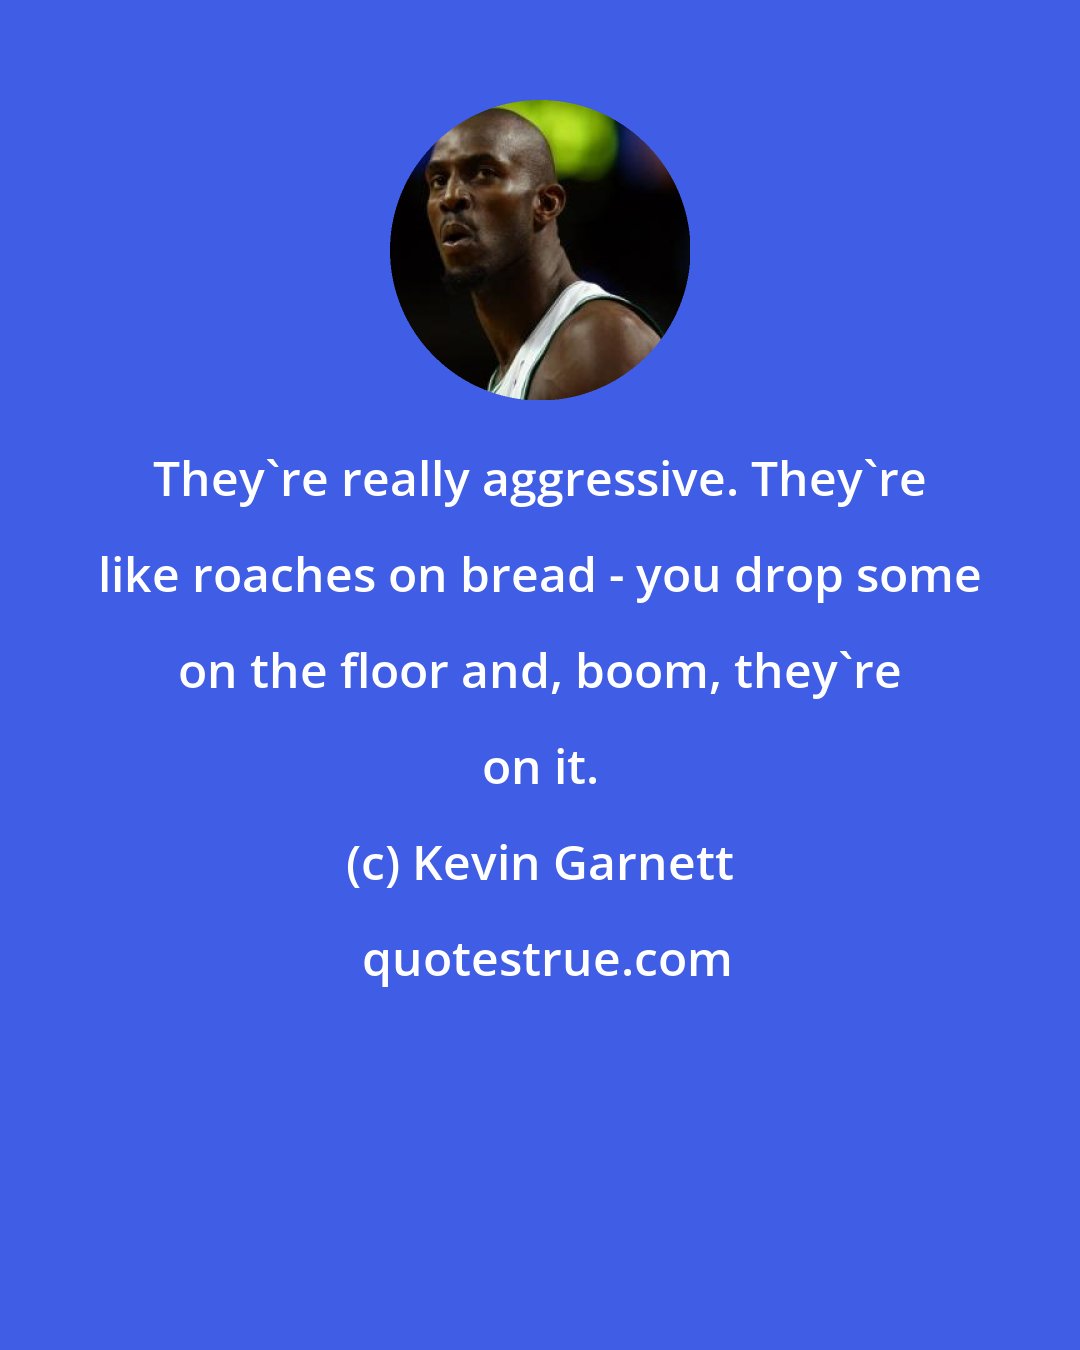 Kevin Garnett: They're really aggressive. They're like roaches on bread - you drop some on the floor and, boom, they're on it.